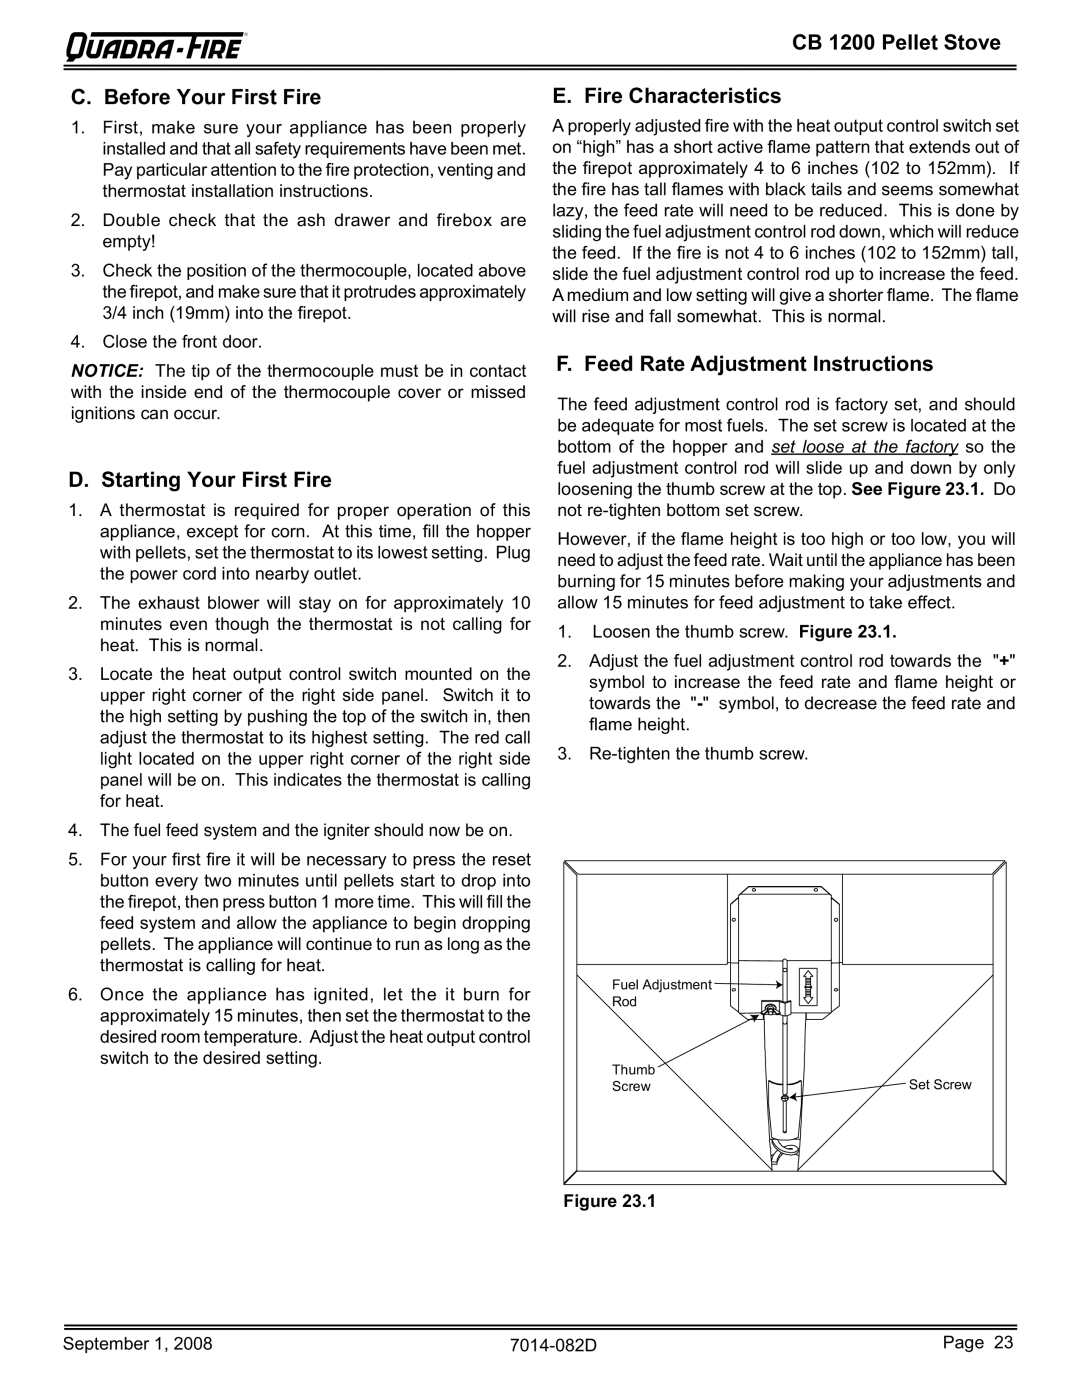 Hearth and Home Technologies CB1200-B owner manual Starting Your First Fire, Feed Rate Adjustment Instructions 